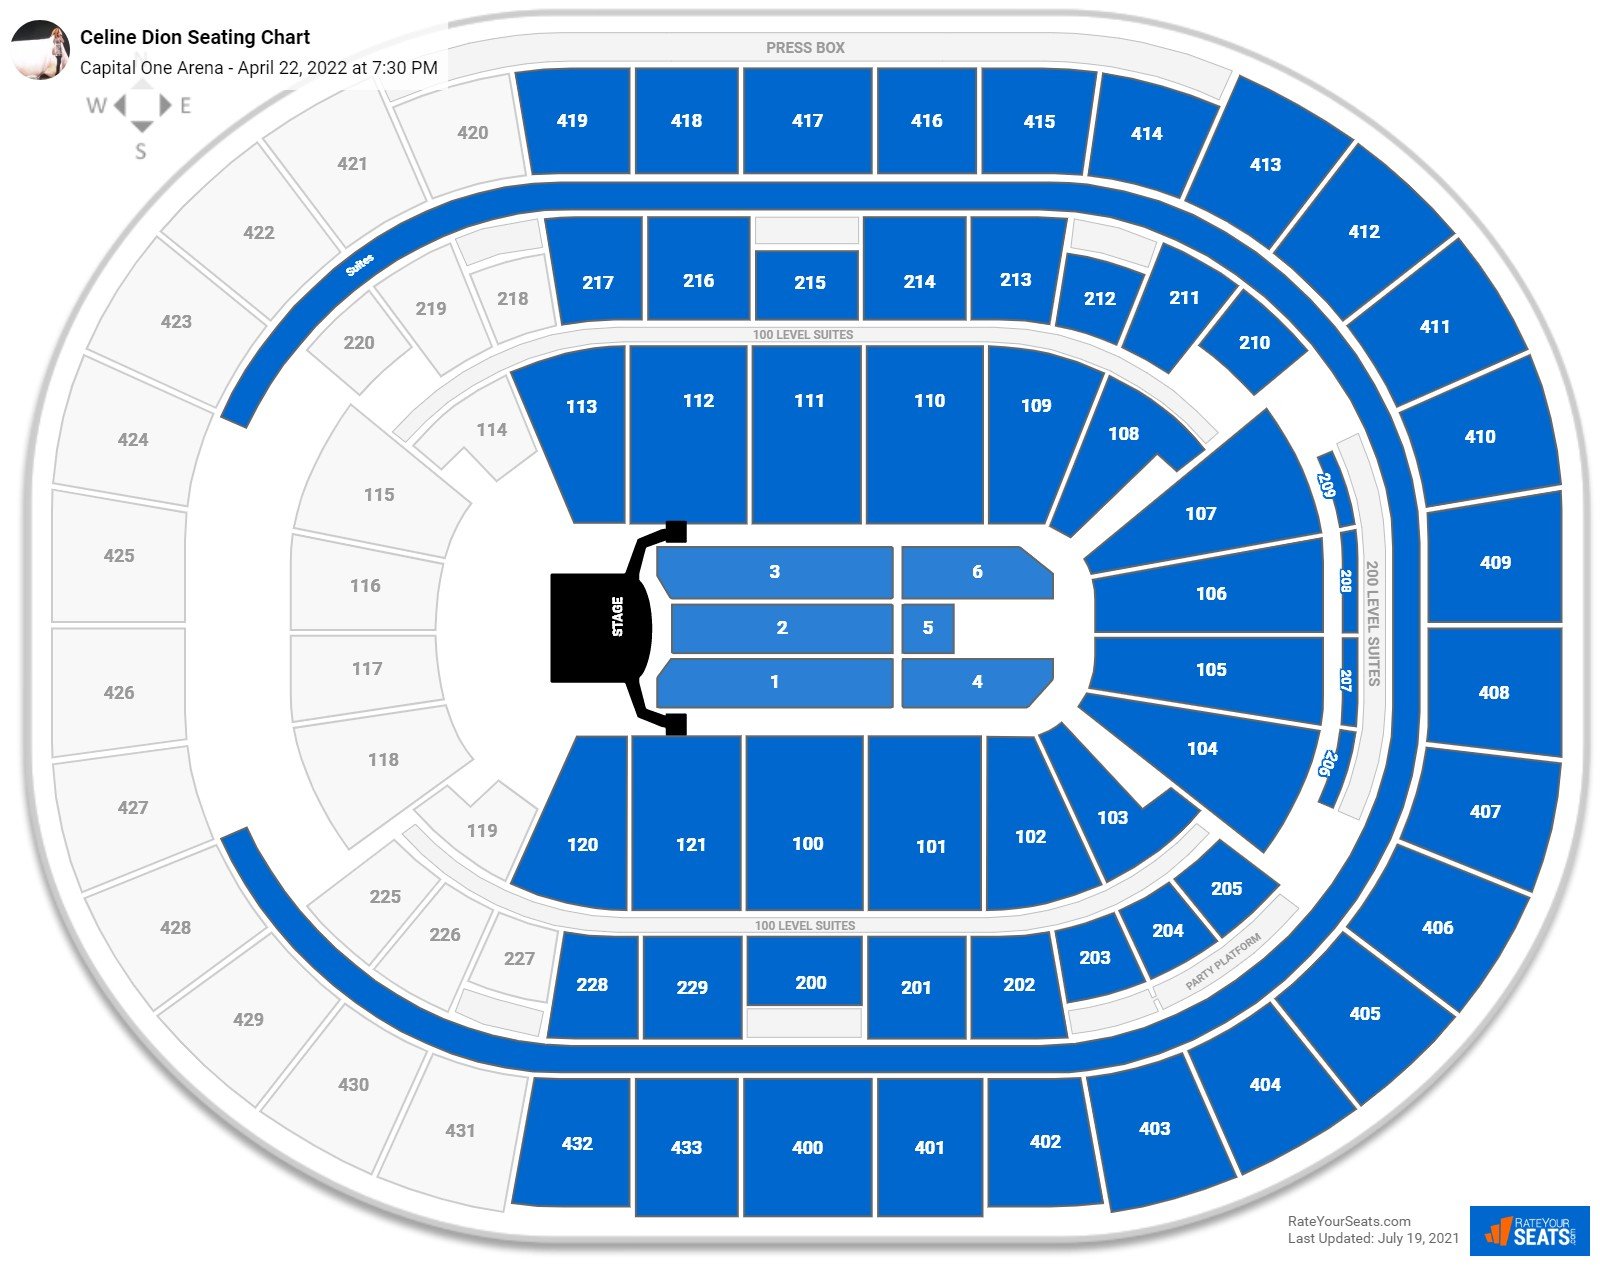 Capital One Arena Seating Charts for Concerts - RateYourSeats.com